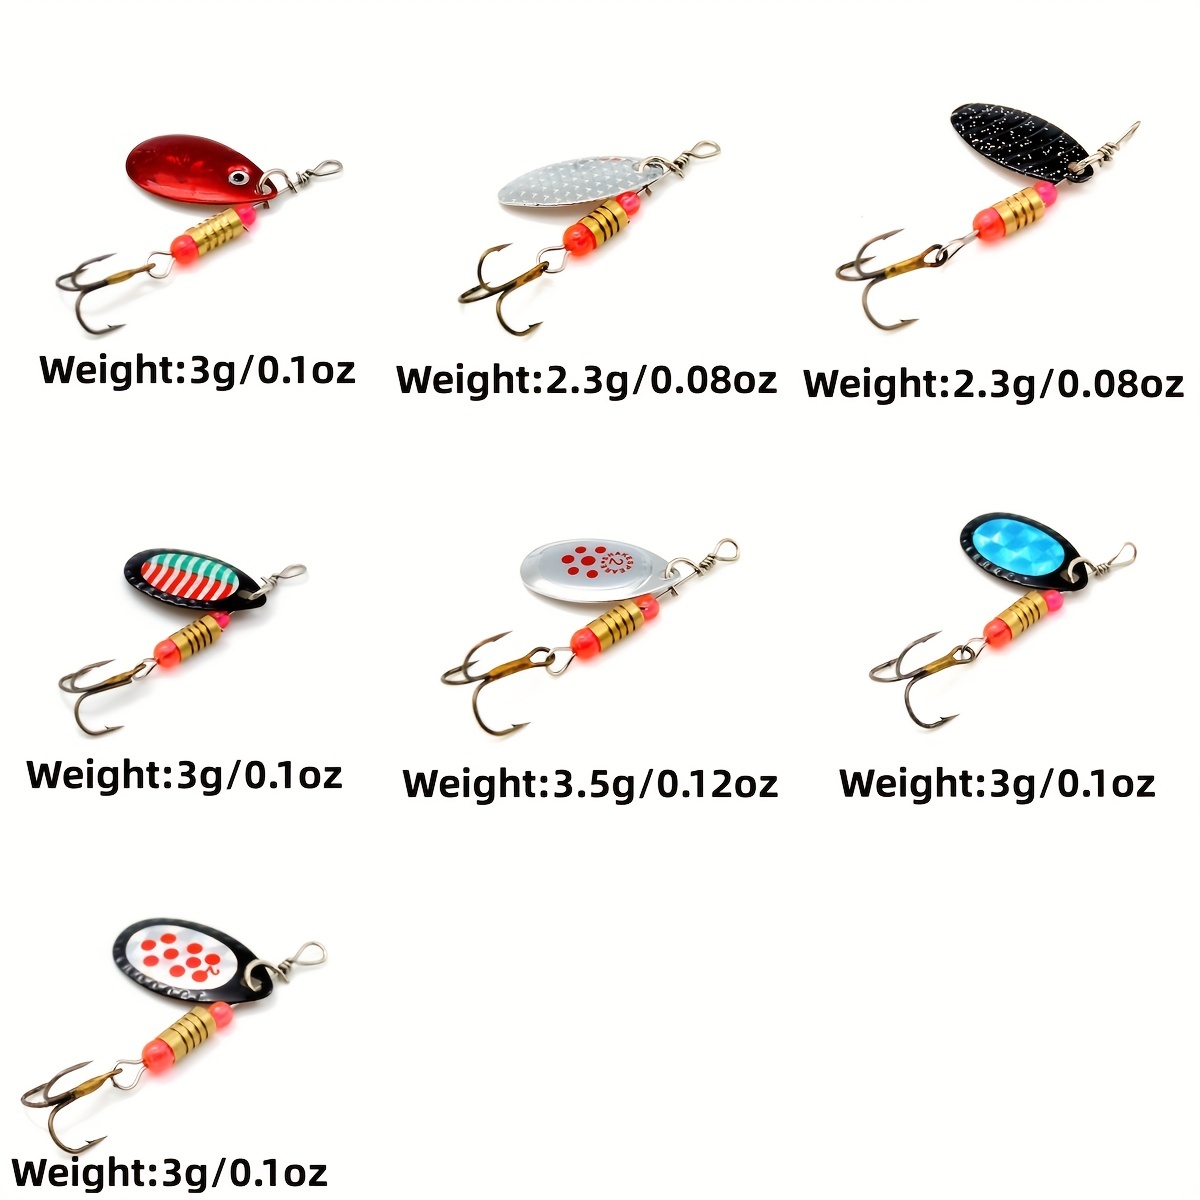  YISHANER 10pcs/Box Fishing Lure Spinnerbait, Bass Trout Salmon  Hard Metal Spinner Baits Kit with Tackle Box : Sports & Outdoors